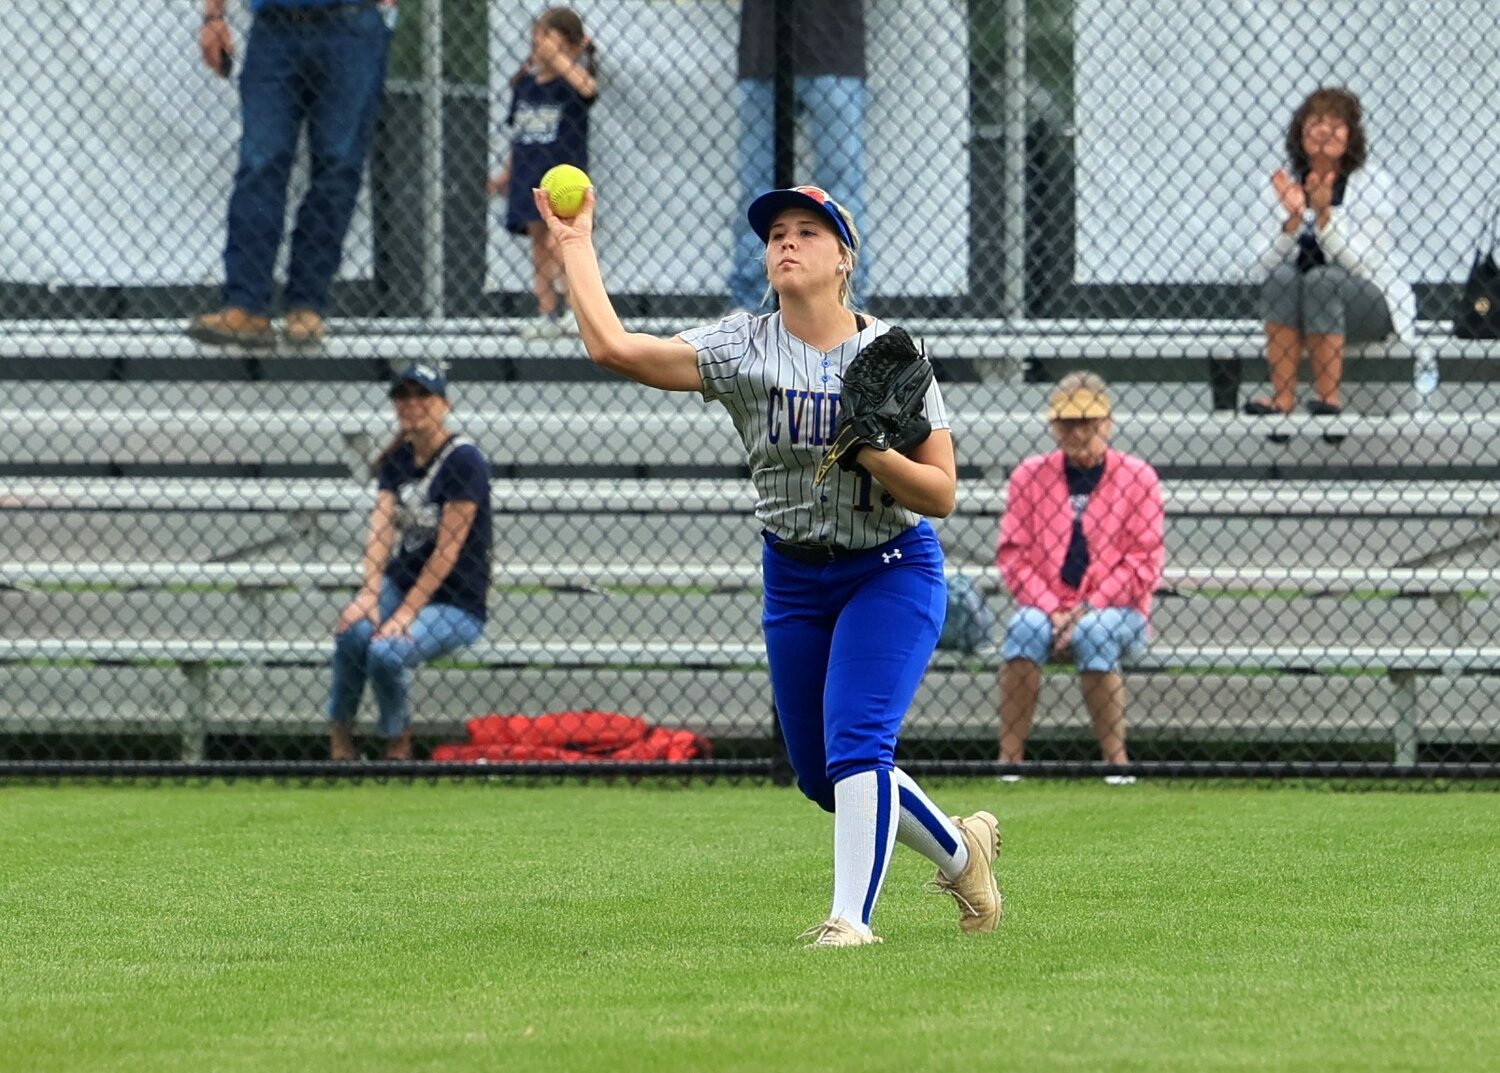 Cville saw their 2024 season come to an end with a 10-0 loss to Tri-West in the sectional semi-finals. The Athenians graduate one senior in Addie Hodges.